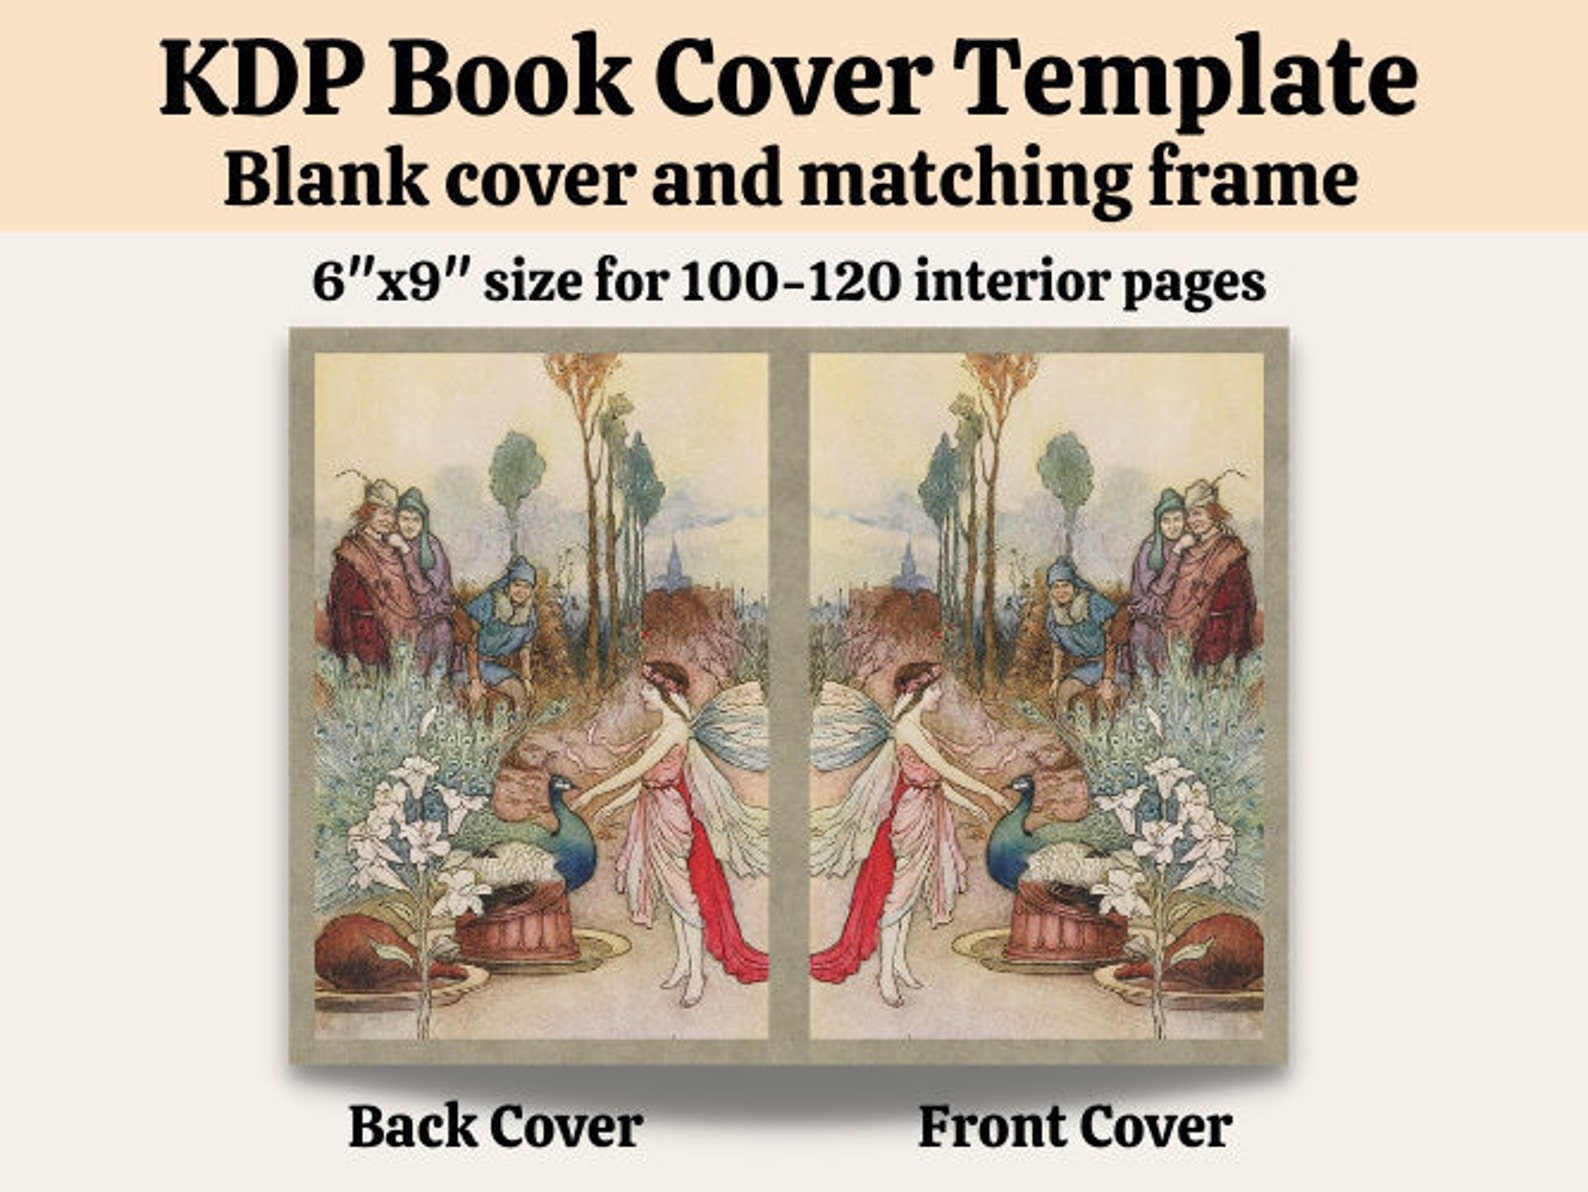 kdp-book-cover-template-bookcover-templatebook-cover-design-etsy